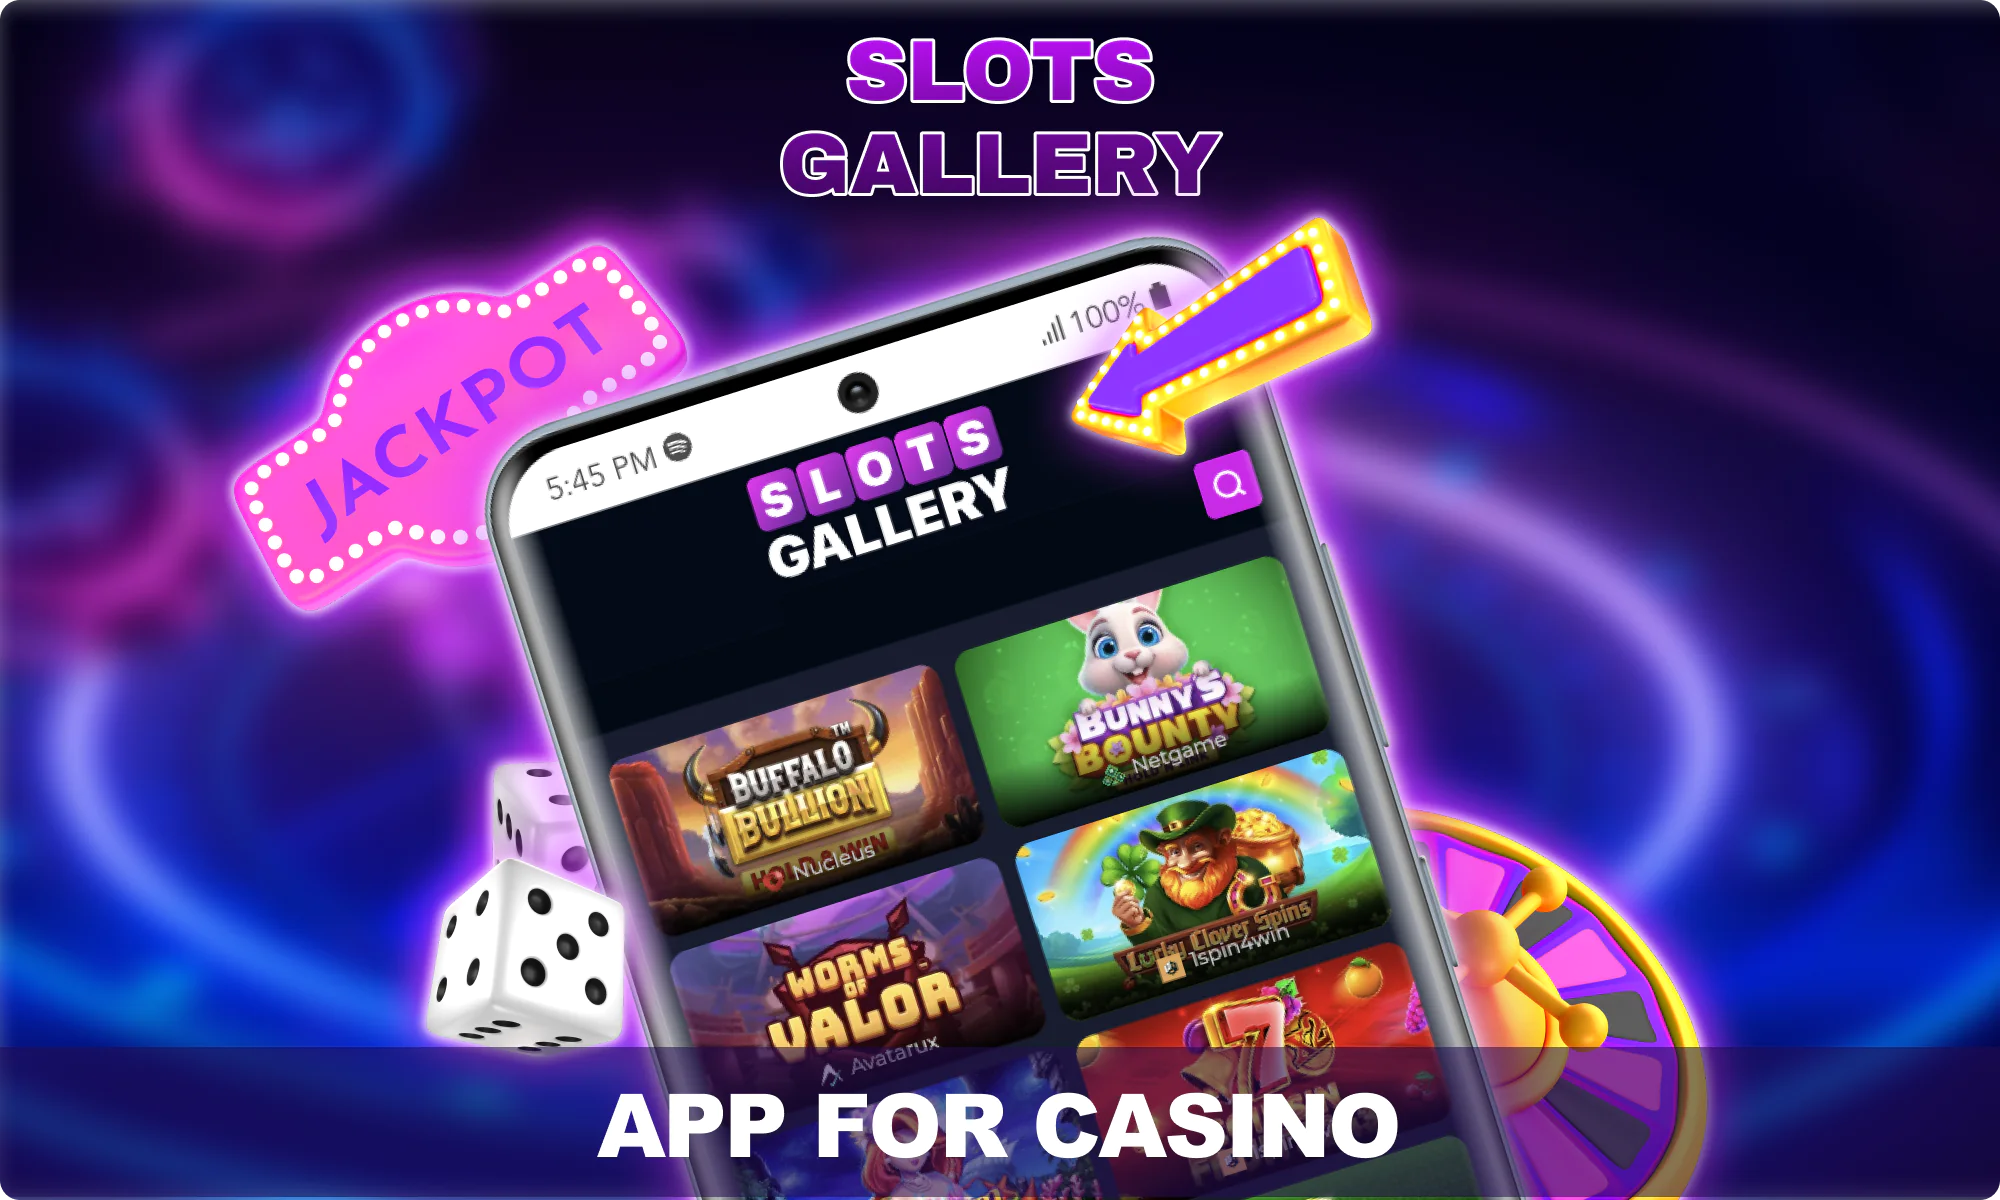 Slots Gallery Mobile App for playing casino